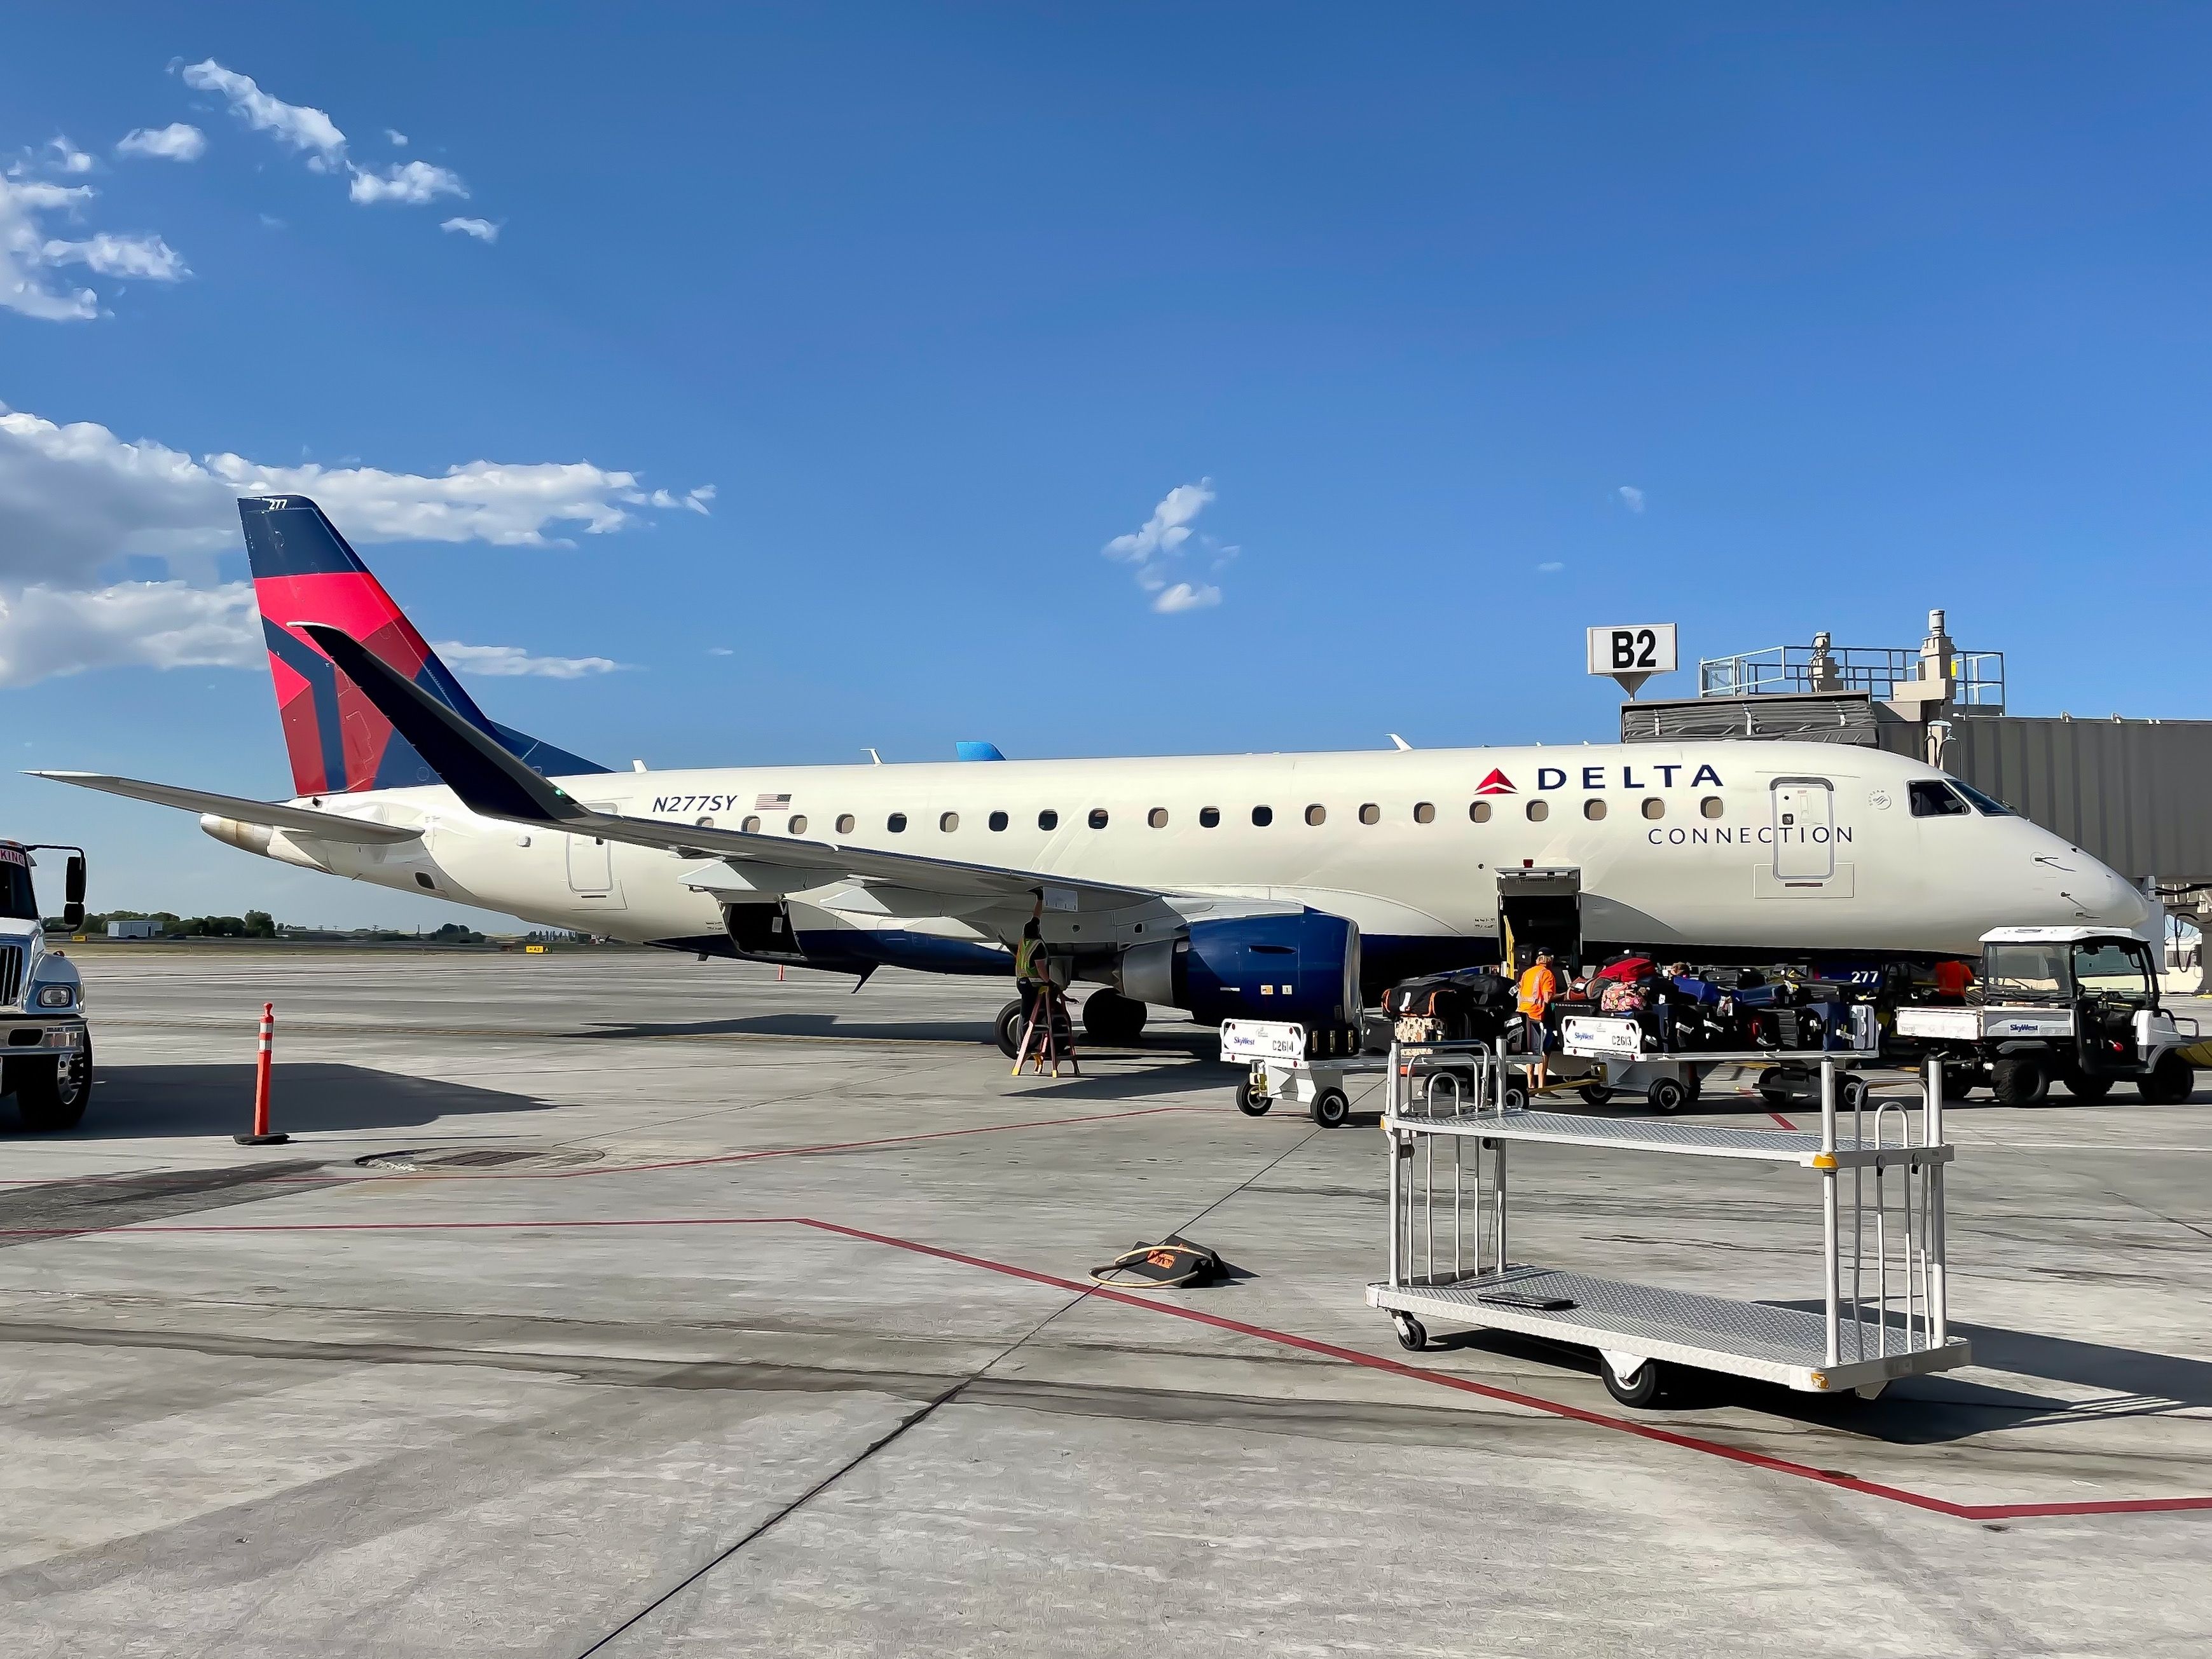 Delta Connection (SkyWest Airlines) Embraer E175 N277SY.